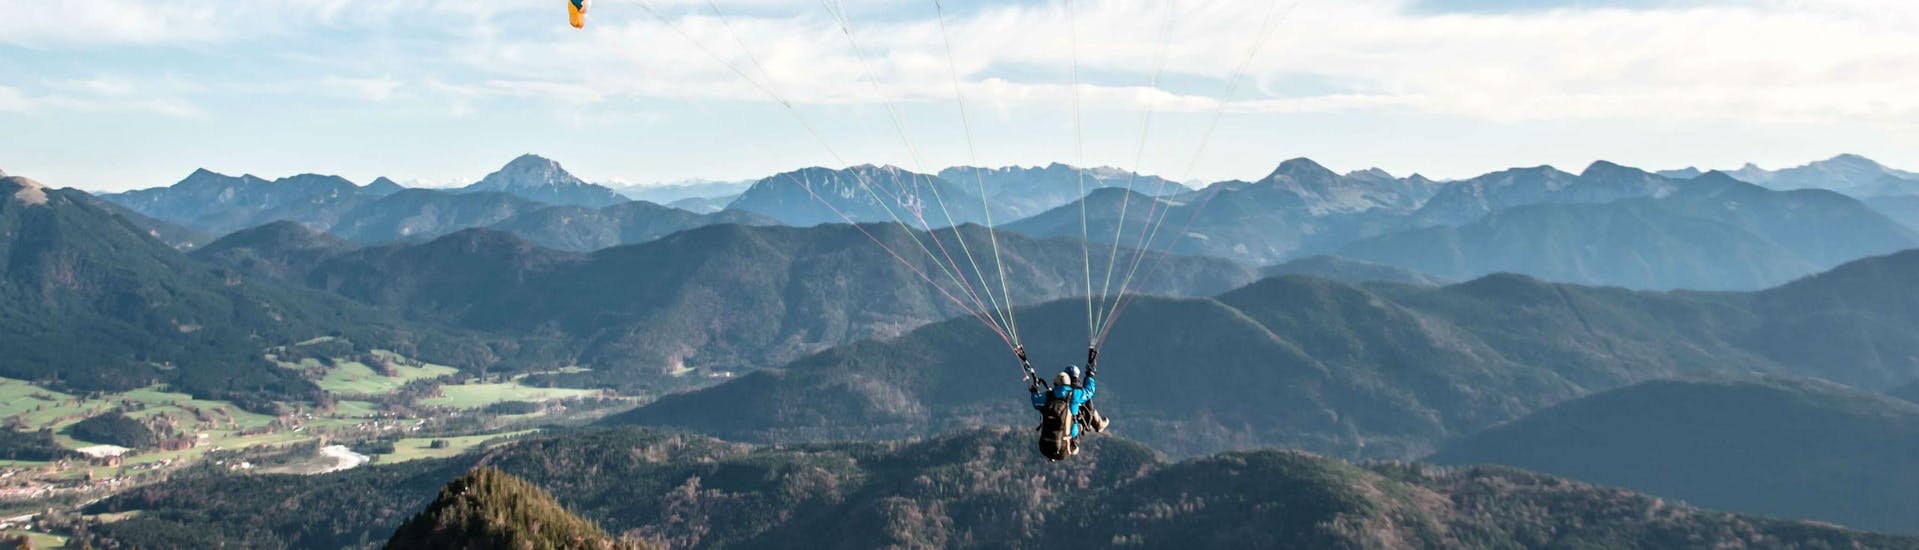 Tandem Paragliding in Wallberg & Brauneck - Free Style Acro.